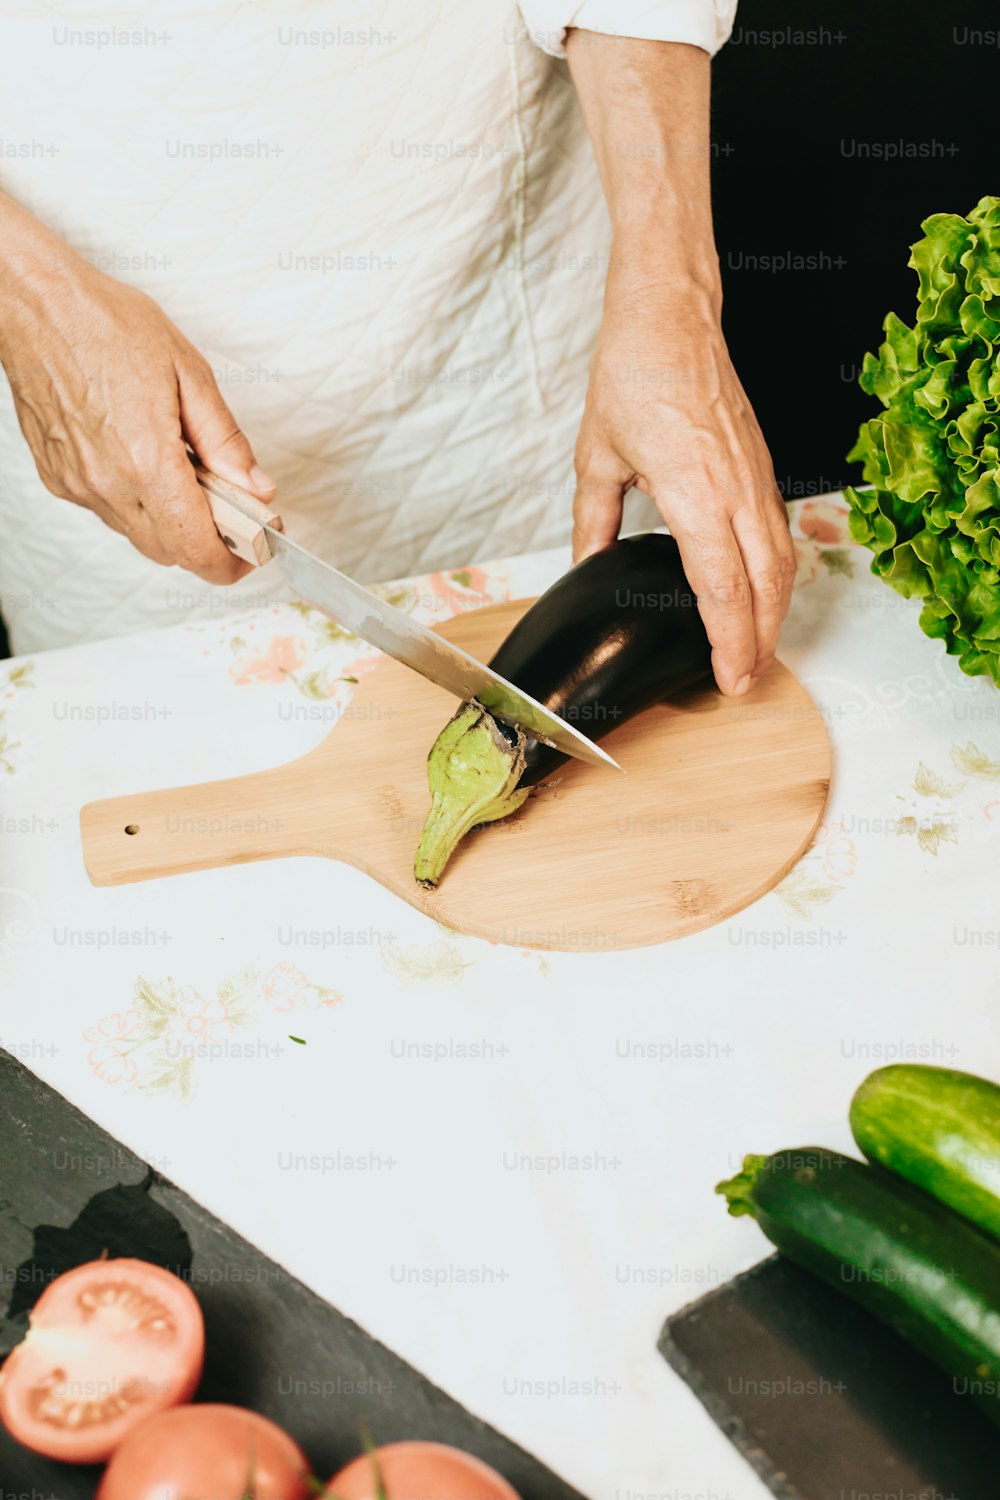 a person cutting up an eggplant on a cutting board